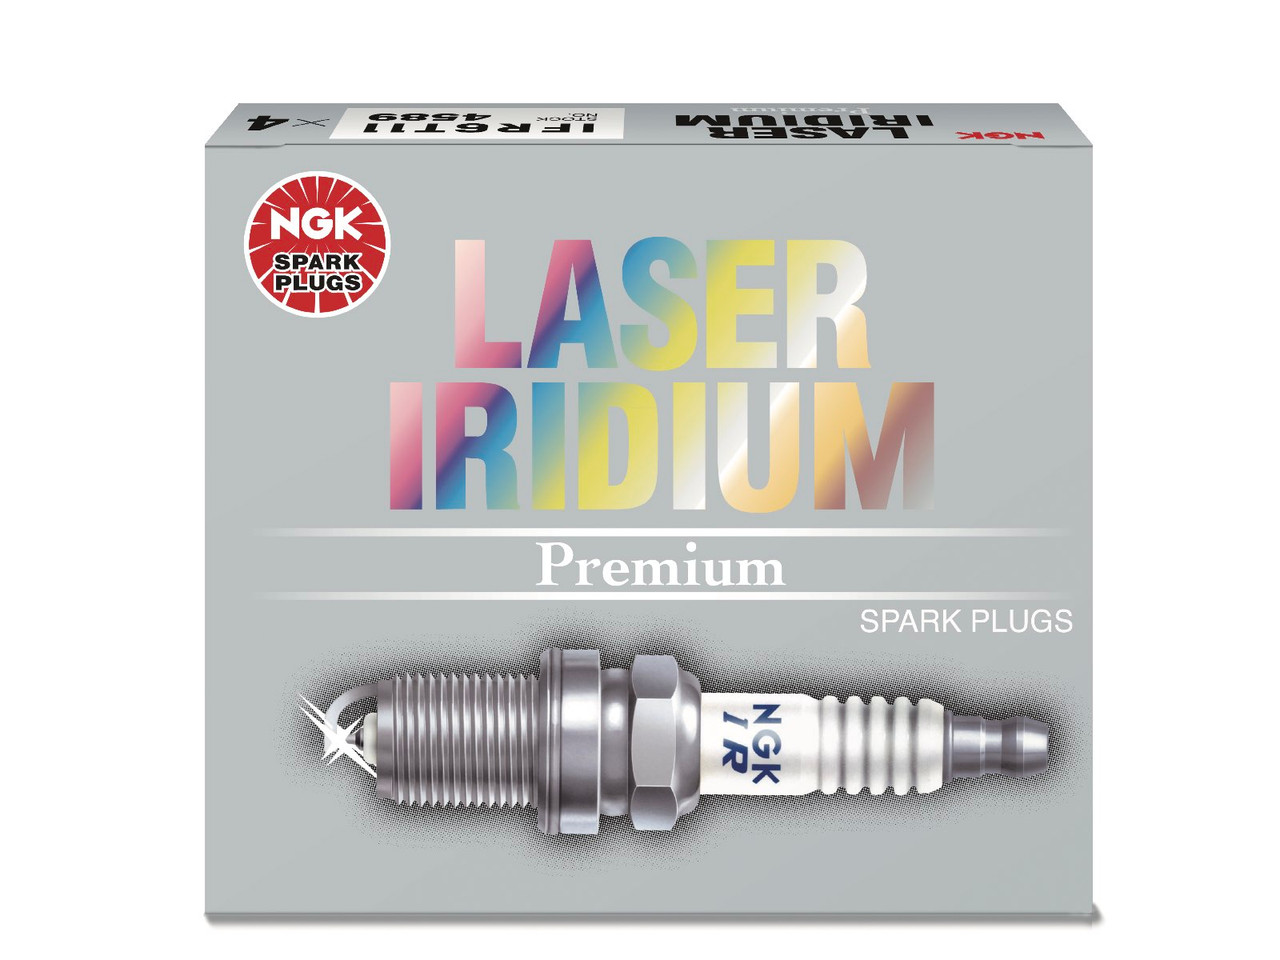 https://cdn11.bigcommerce.com/s-351ed/images/stencil/{:size}/products/24671/104651/spark_plugs_for_mini_paceman_r61_ngk_laser_iridium_NBAVH4S_24671__76310.1681421118.jpg?c=2